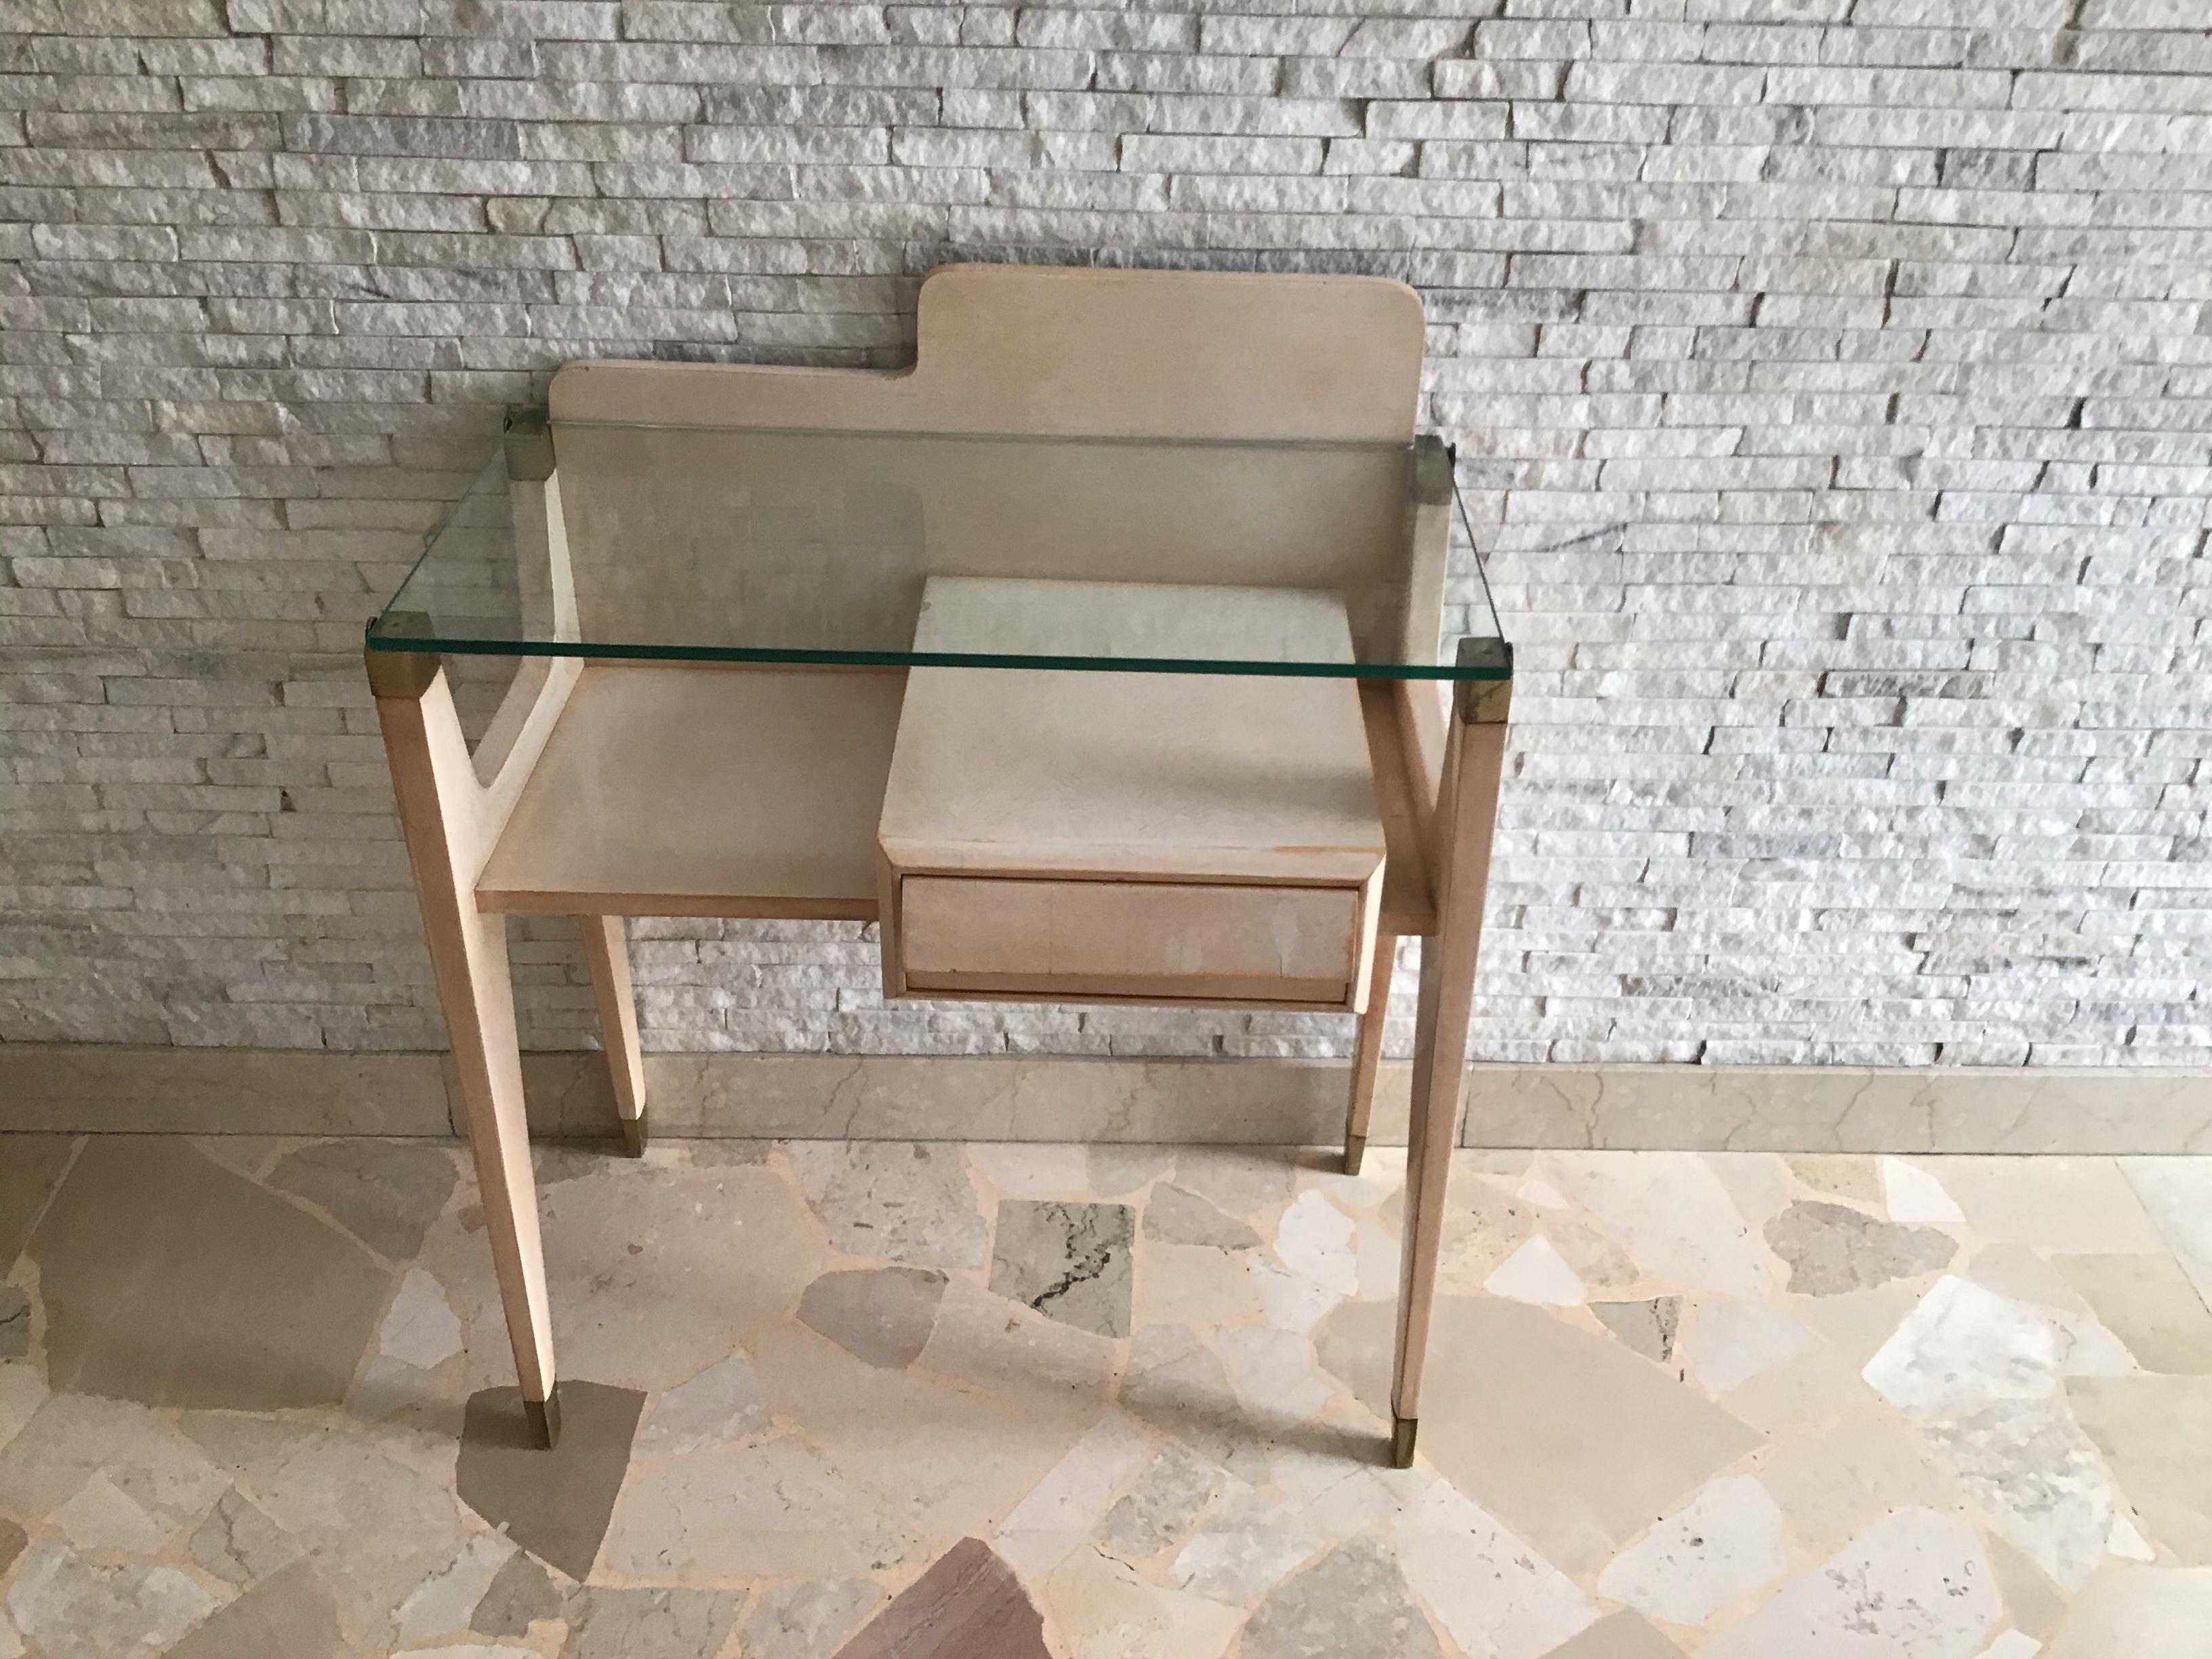 Gio’ Ponti “ Stile “ Bedside Tables Brass Wood Glass 1950 Italy  In Good Condition For Sale In Milano, IT